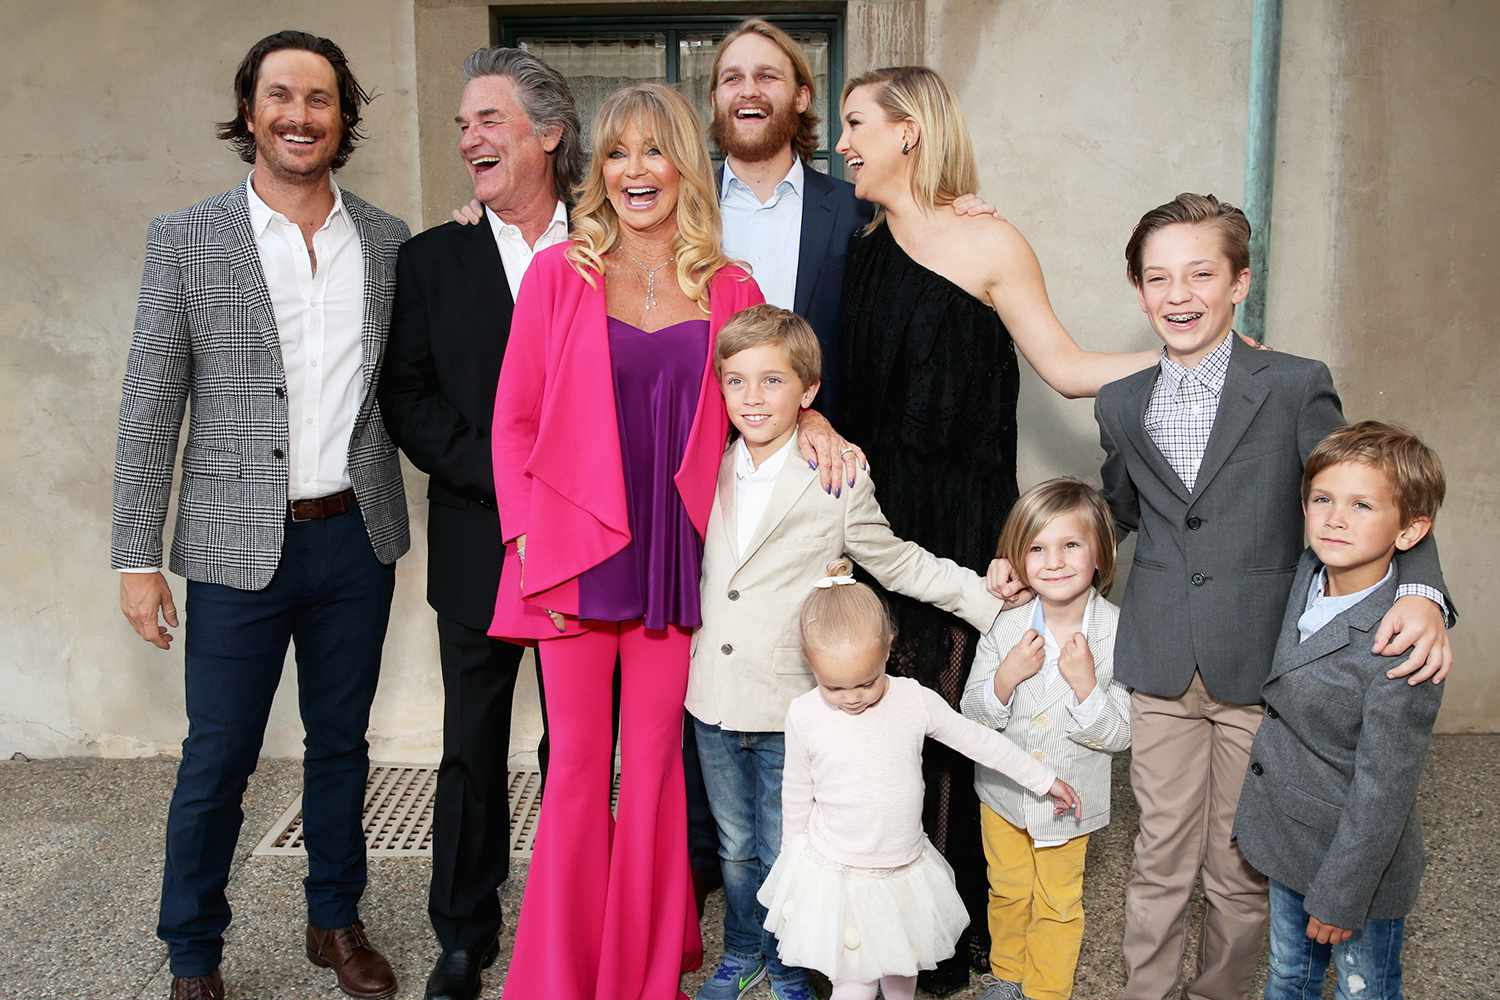 BEVERLY HILLS, CA - MAY 06: Actors Oliver Hudson, Kurt Russell, Goldie Hawn, Wyatt Russell and Kate Hudson with kids Ryder Robinson, Wilder Hudson, Bodhi Hudson, Rio Hudson and Bingham Bellamy attend Annual Goldie's Love In For Kids hosted by Goldie Hawn at Ron Burkle's Green Acres Estate on May 6, 2016 in Beverly Hills, Californi (Photo by Todd Williamson/Getty Images)